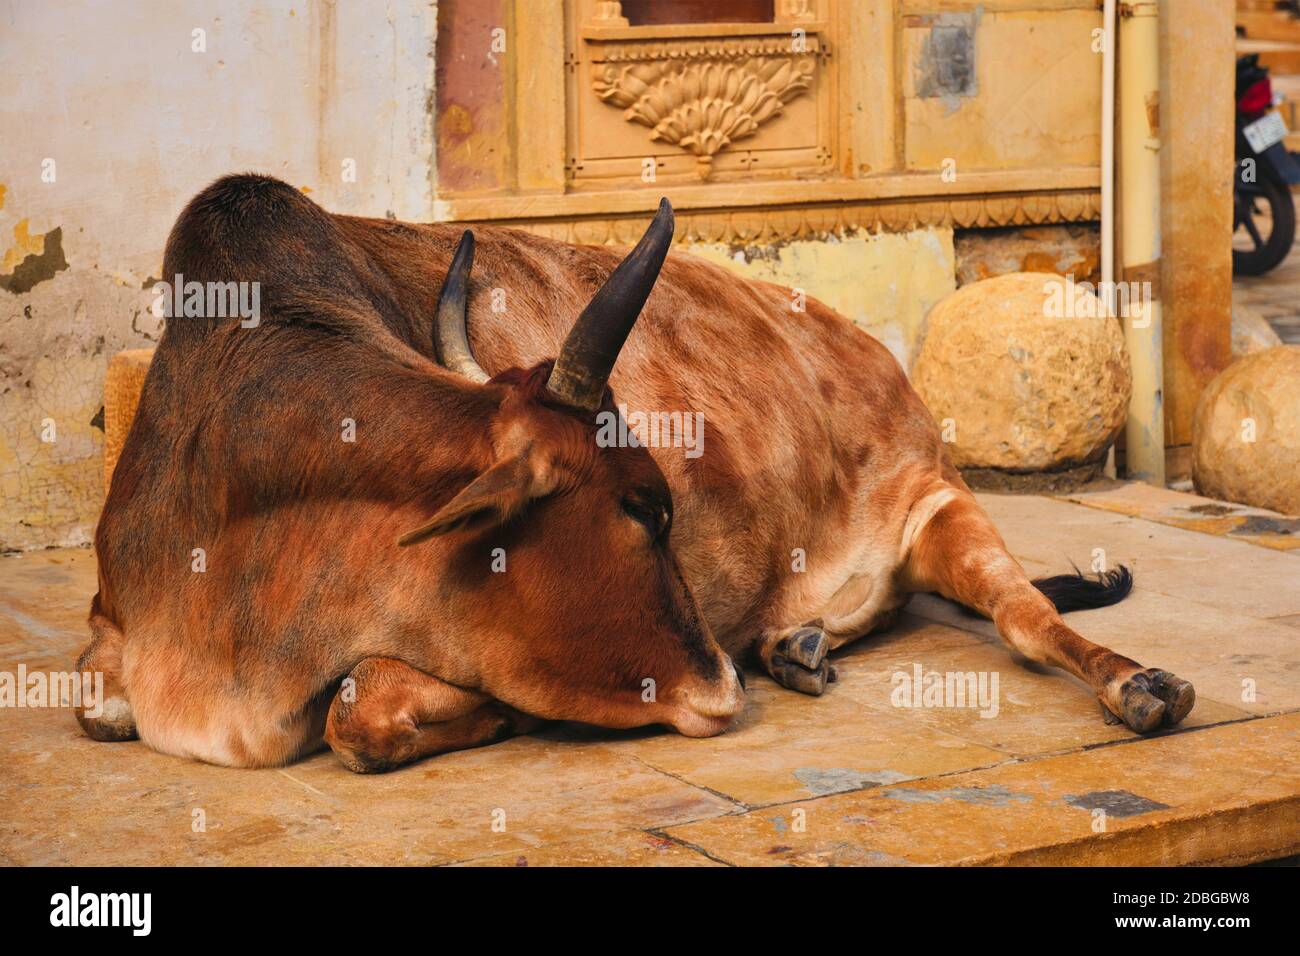 Indian cow resting sleeping in the street. Cow is a sacred animal ...